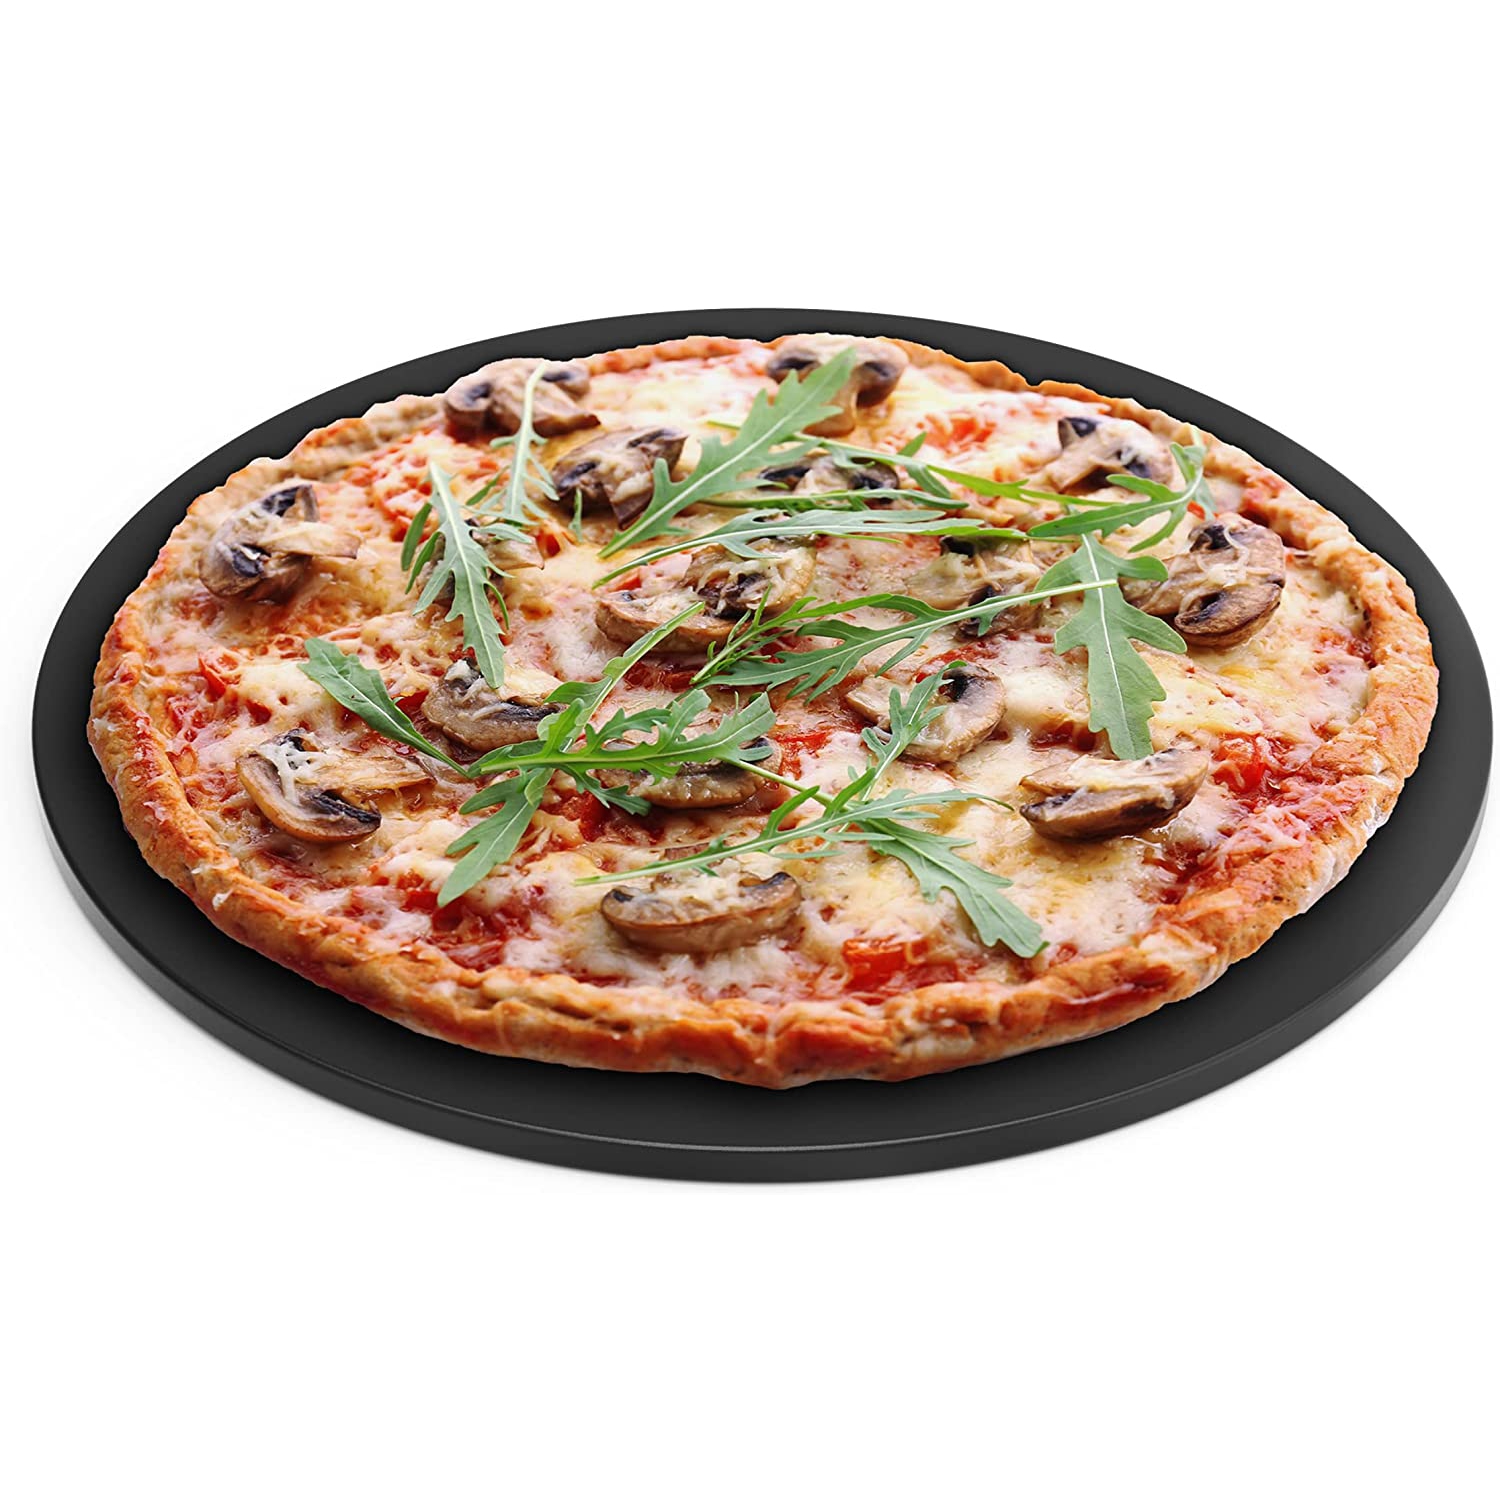 Chef Pomodoro 15" Round Pizza Stone, Glazed Natural Stone for Baking Ovens and Grills, Pizza Bread Baking